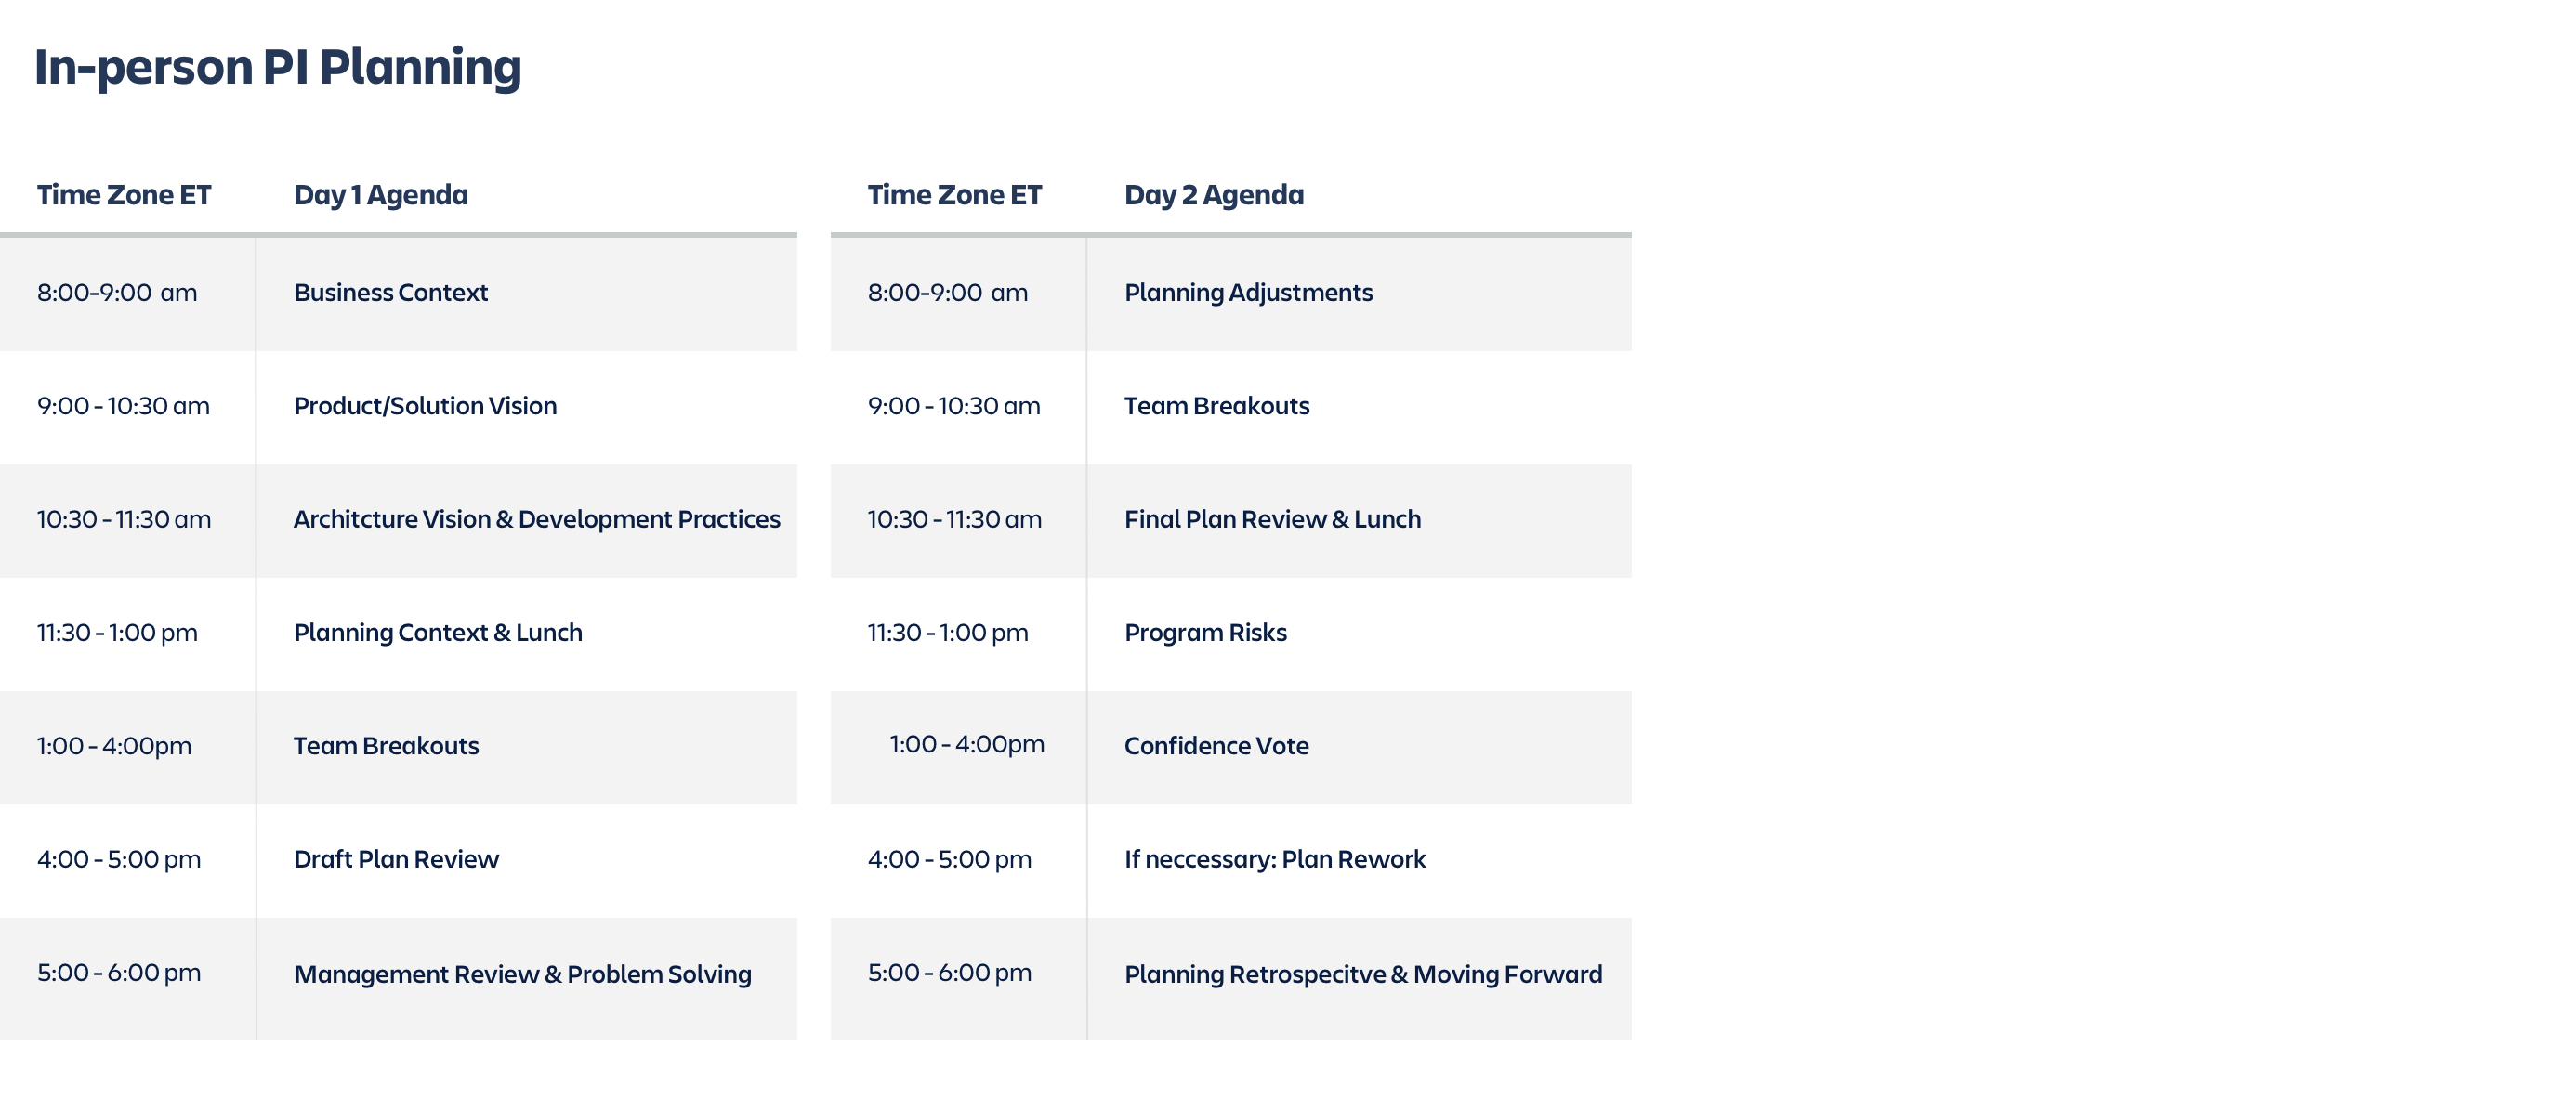 sample schedule for a typical in-person PI planning event